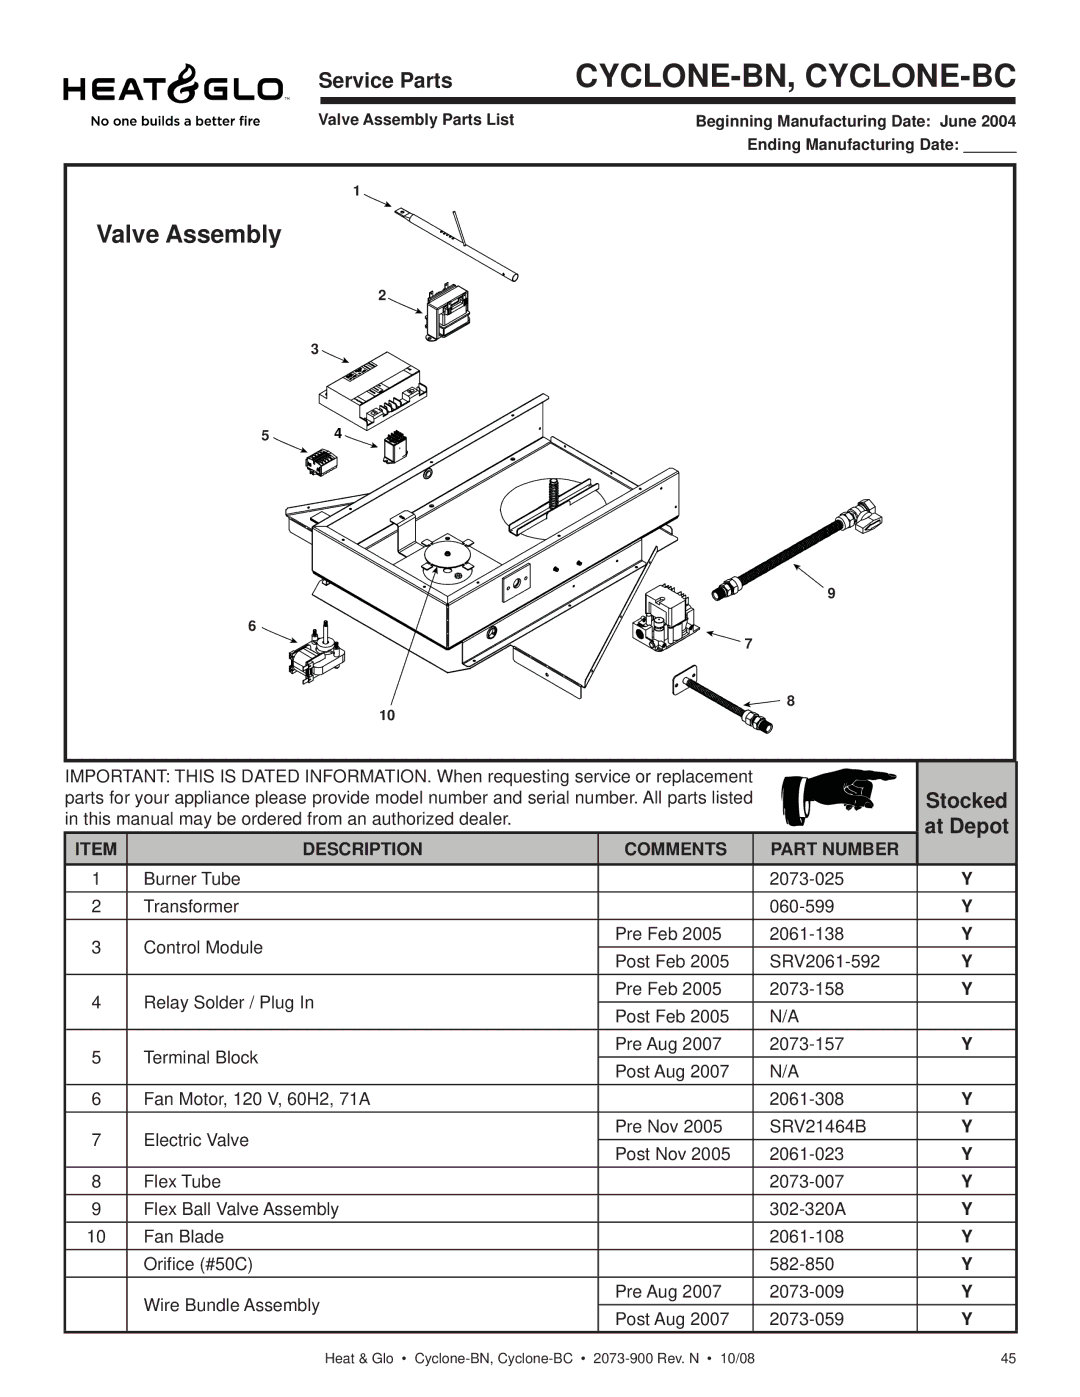 Hearth and Home Technologies Cyclone-BN, Cyclone-BC owner manual Valve Assembly 